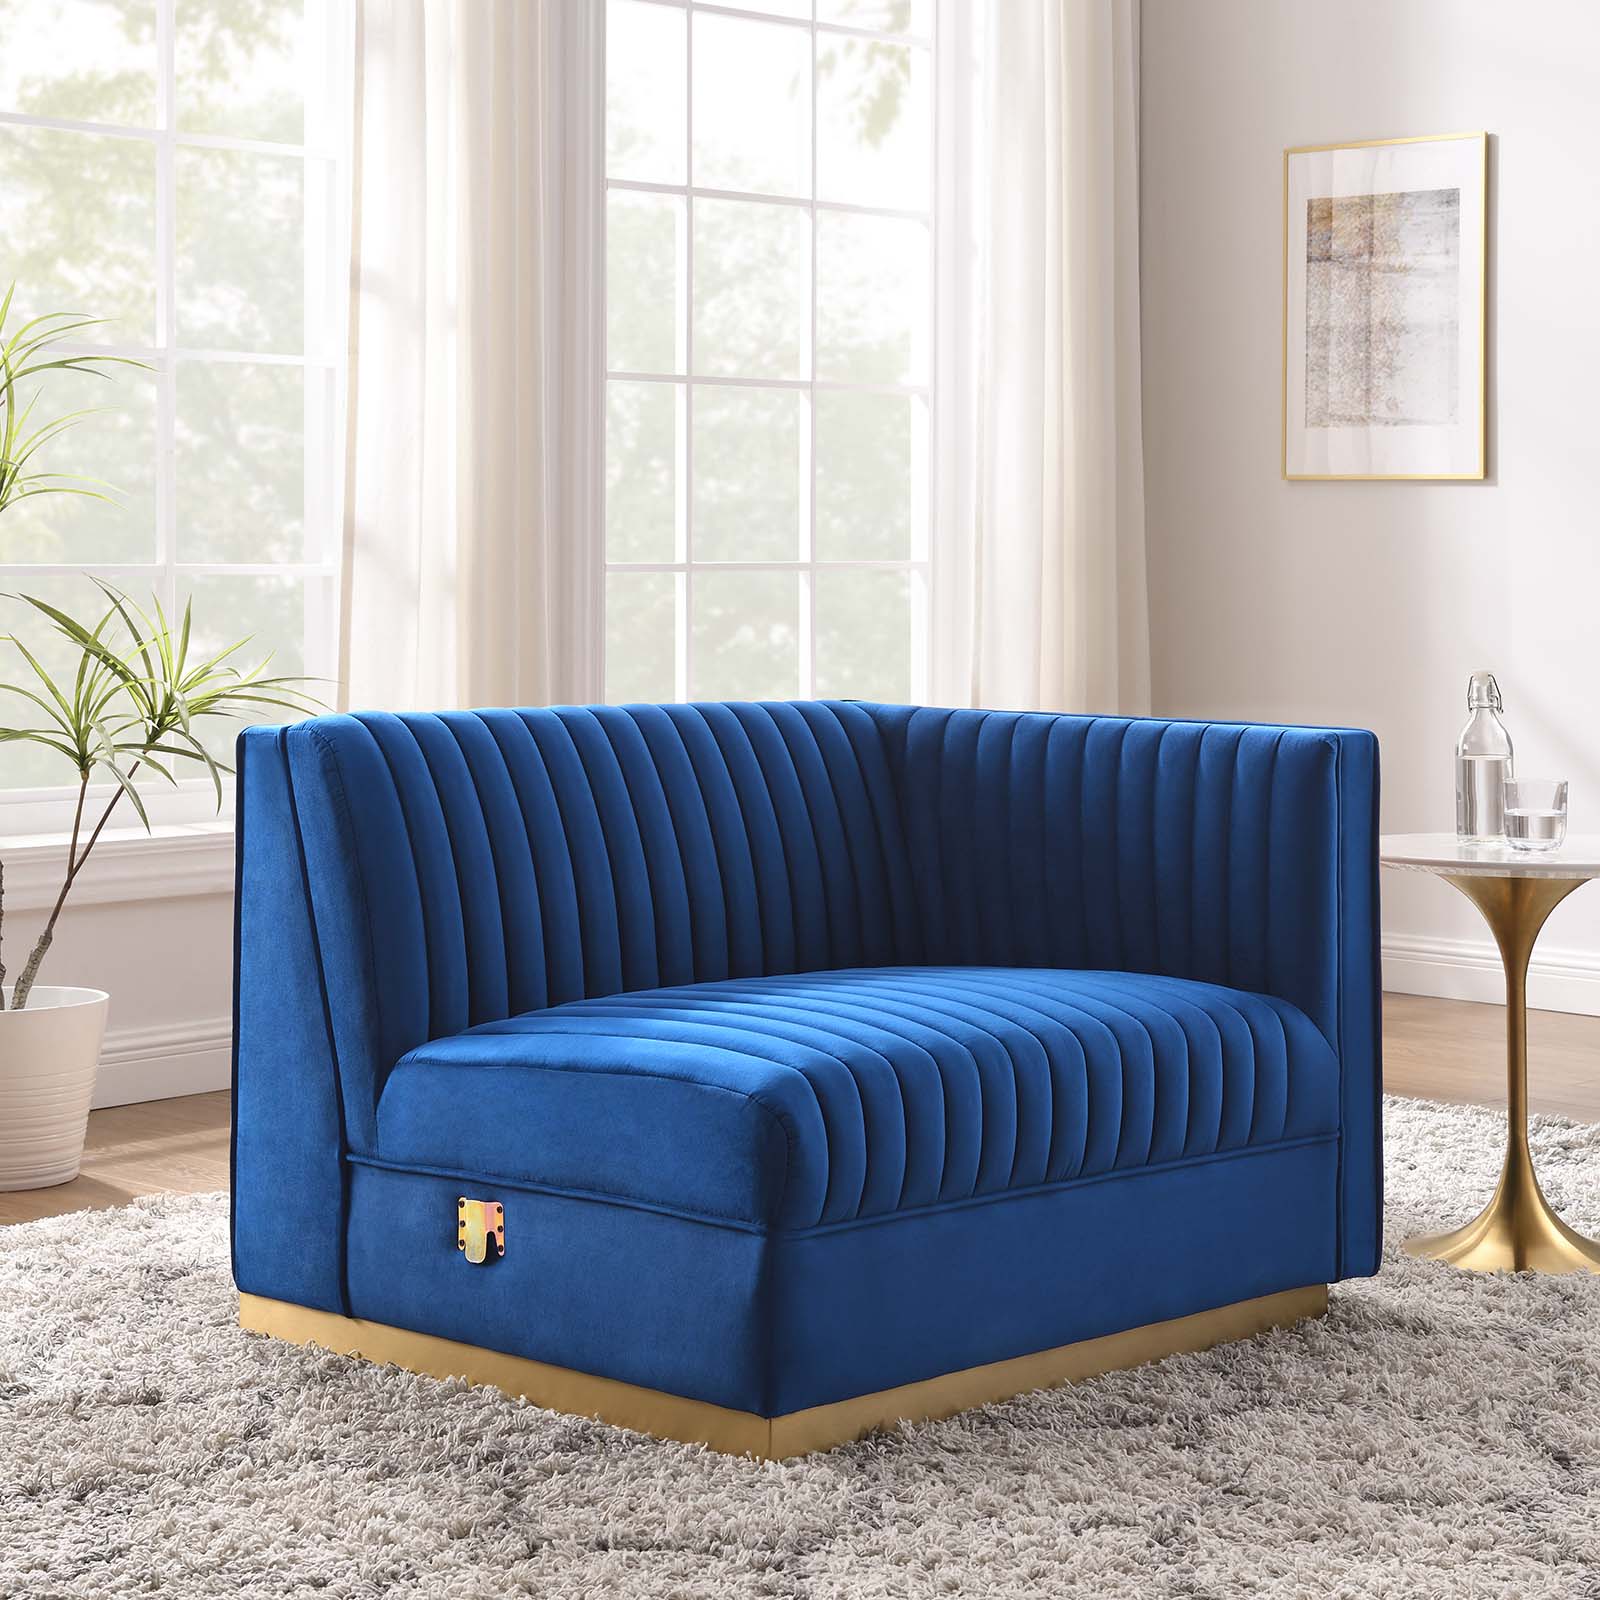 Modway Accent Chairs - Sanguine Channel Tufted Performance Velvet Modular Sectional Sofa Right-Arm Chair Navy Blue